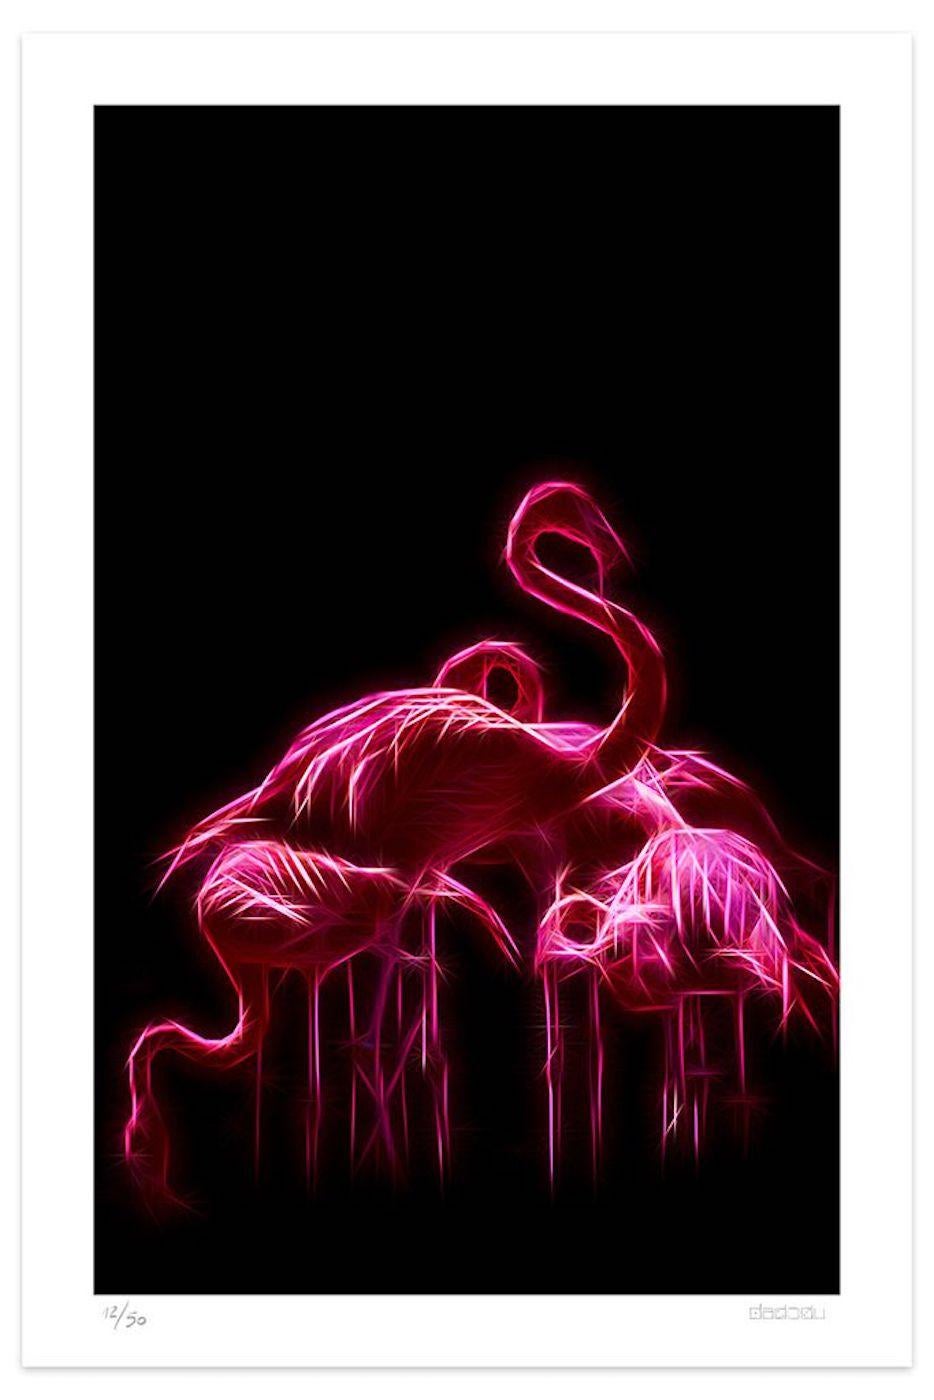 Image dimensions: 90 x 56.4 cm.

Flamingos is an elegant giclée print realized by the contemporary group of artists Dadodu in 2019.

This original artwork represents flamingos with neon pink lights on a black background.

Hand-signed on the lower